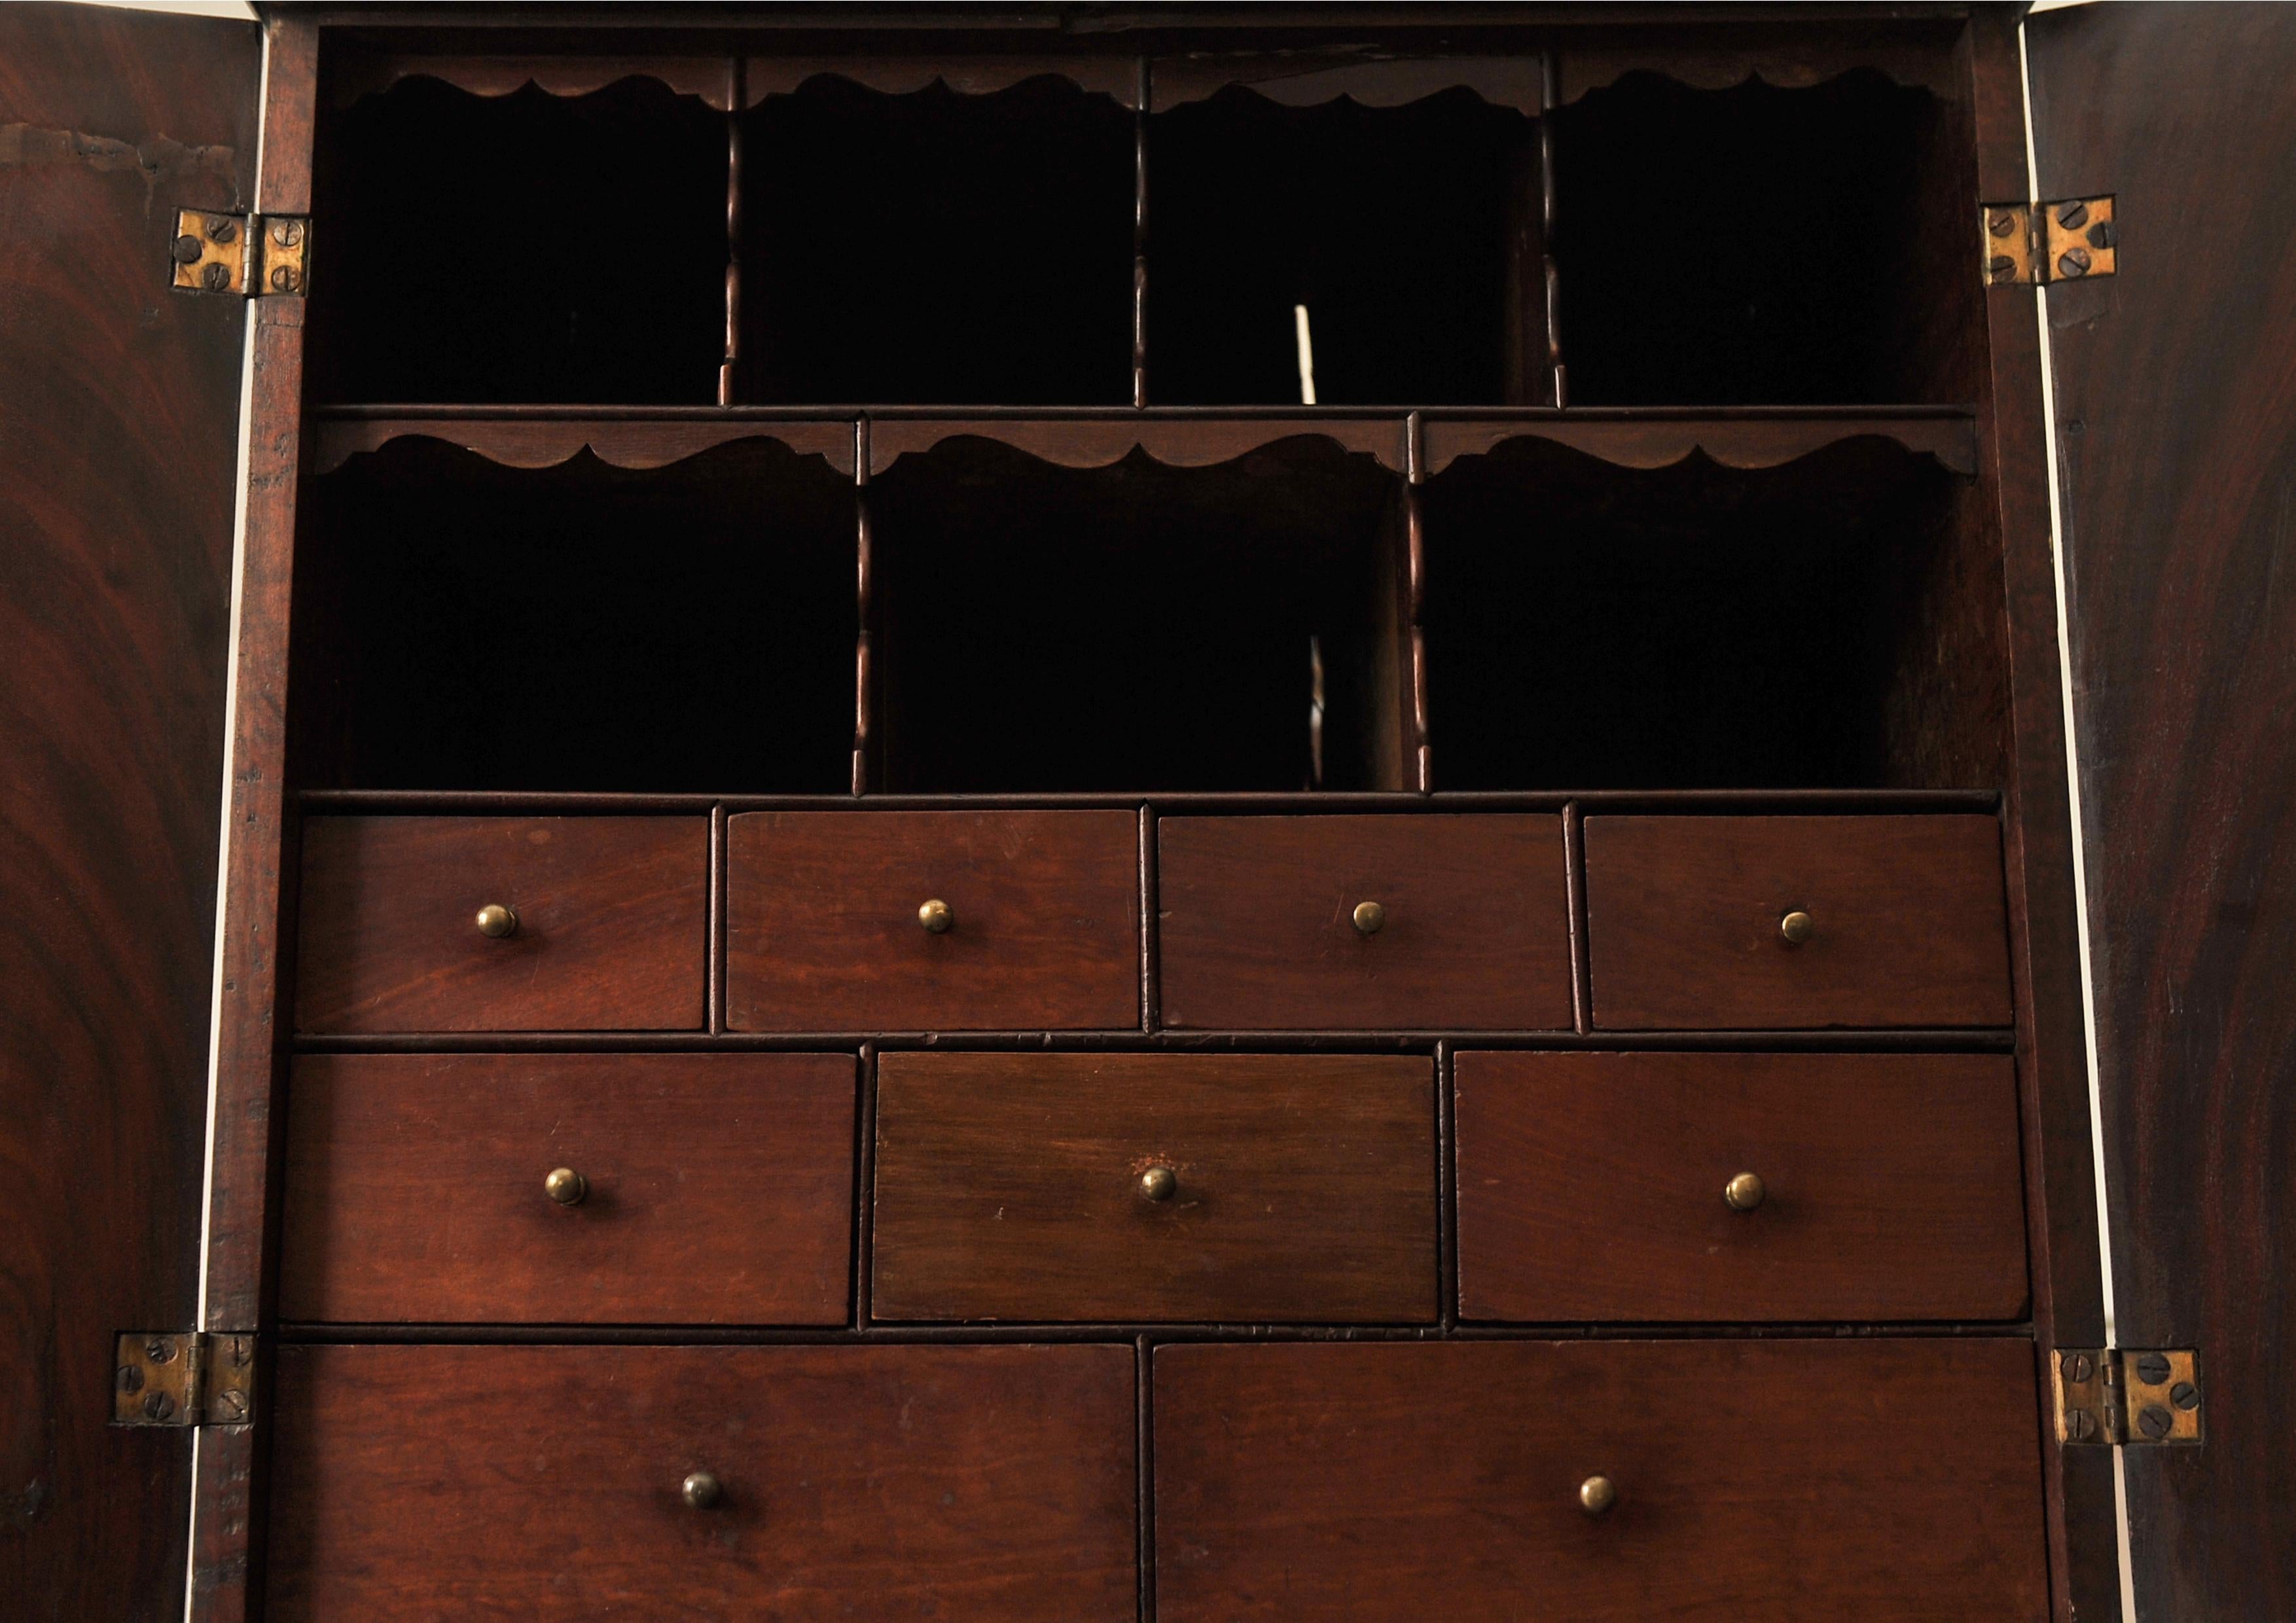 A Rare 18th Century Mahogany & Brass Two Door Table Cabinet Fitted With Pigeonholes & Fitted Drawers.

Handmade quality cabinetmaking with each drawer constructed of hand made dovetails.

Item comes with original working key. 

Item is finished with